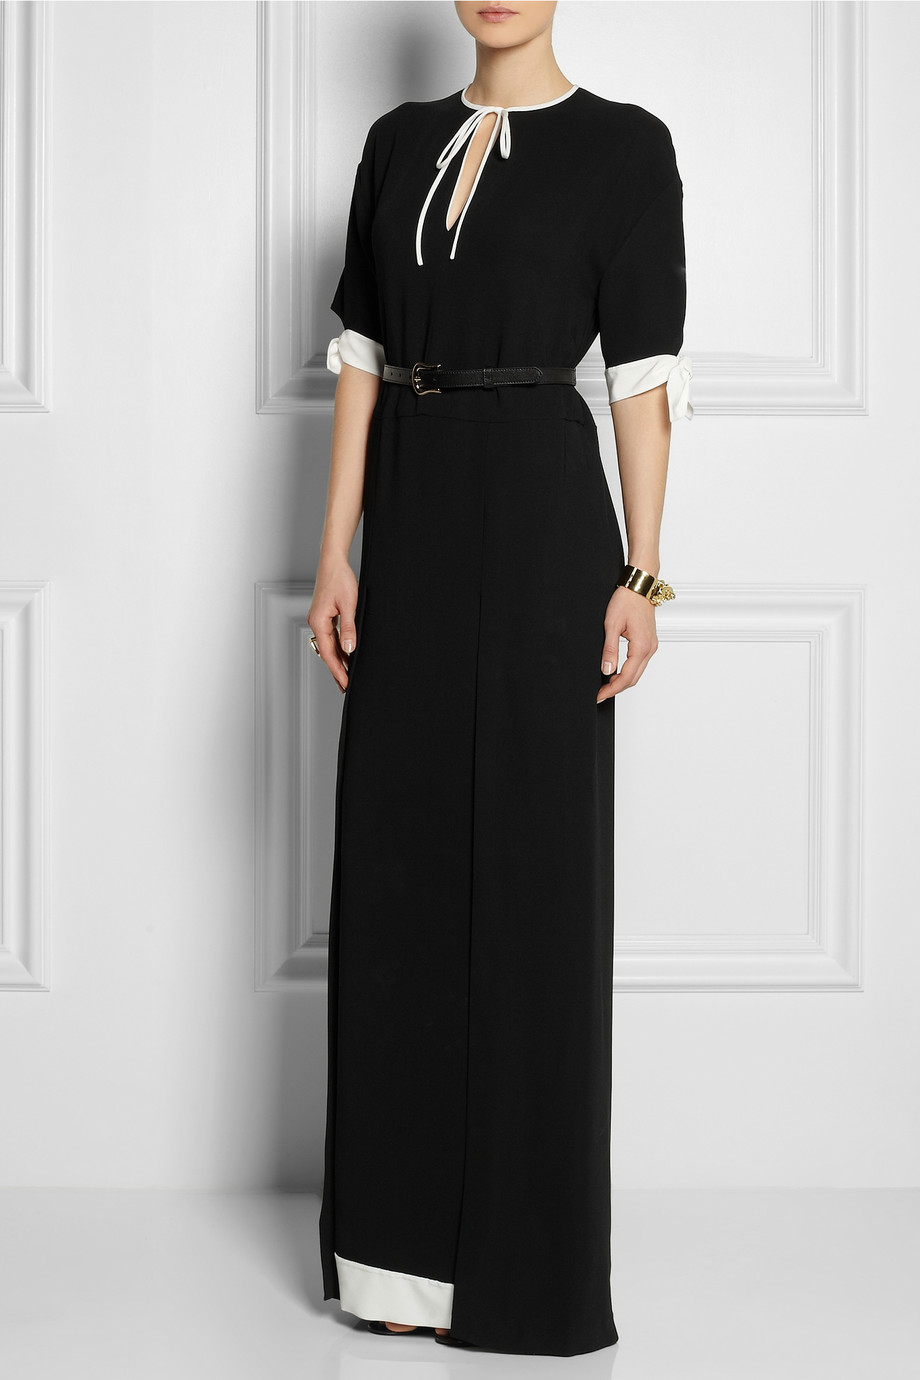 Lyst - Fendi Double-Faced Stretch-Georgette Gown in Black